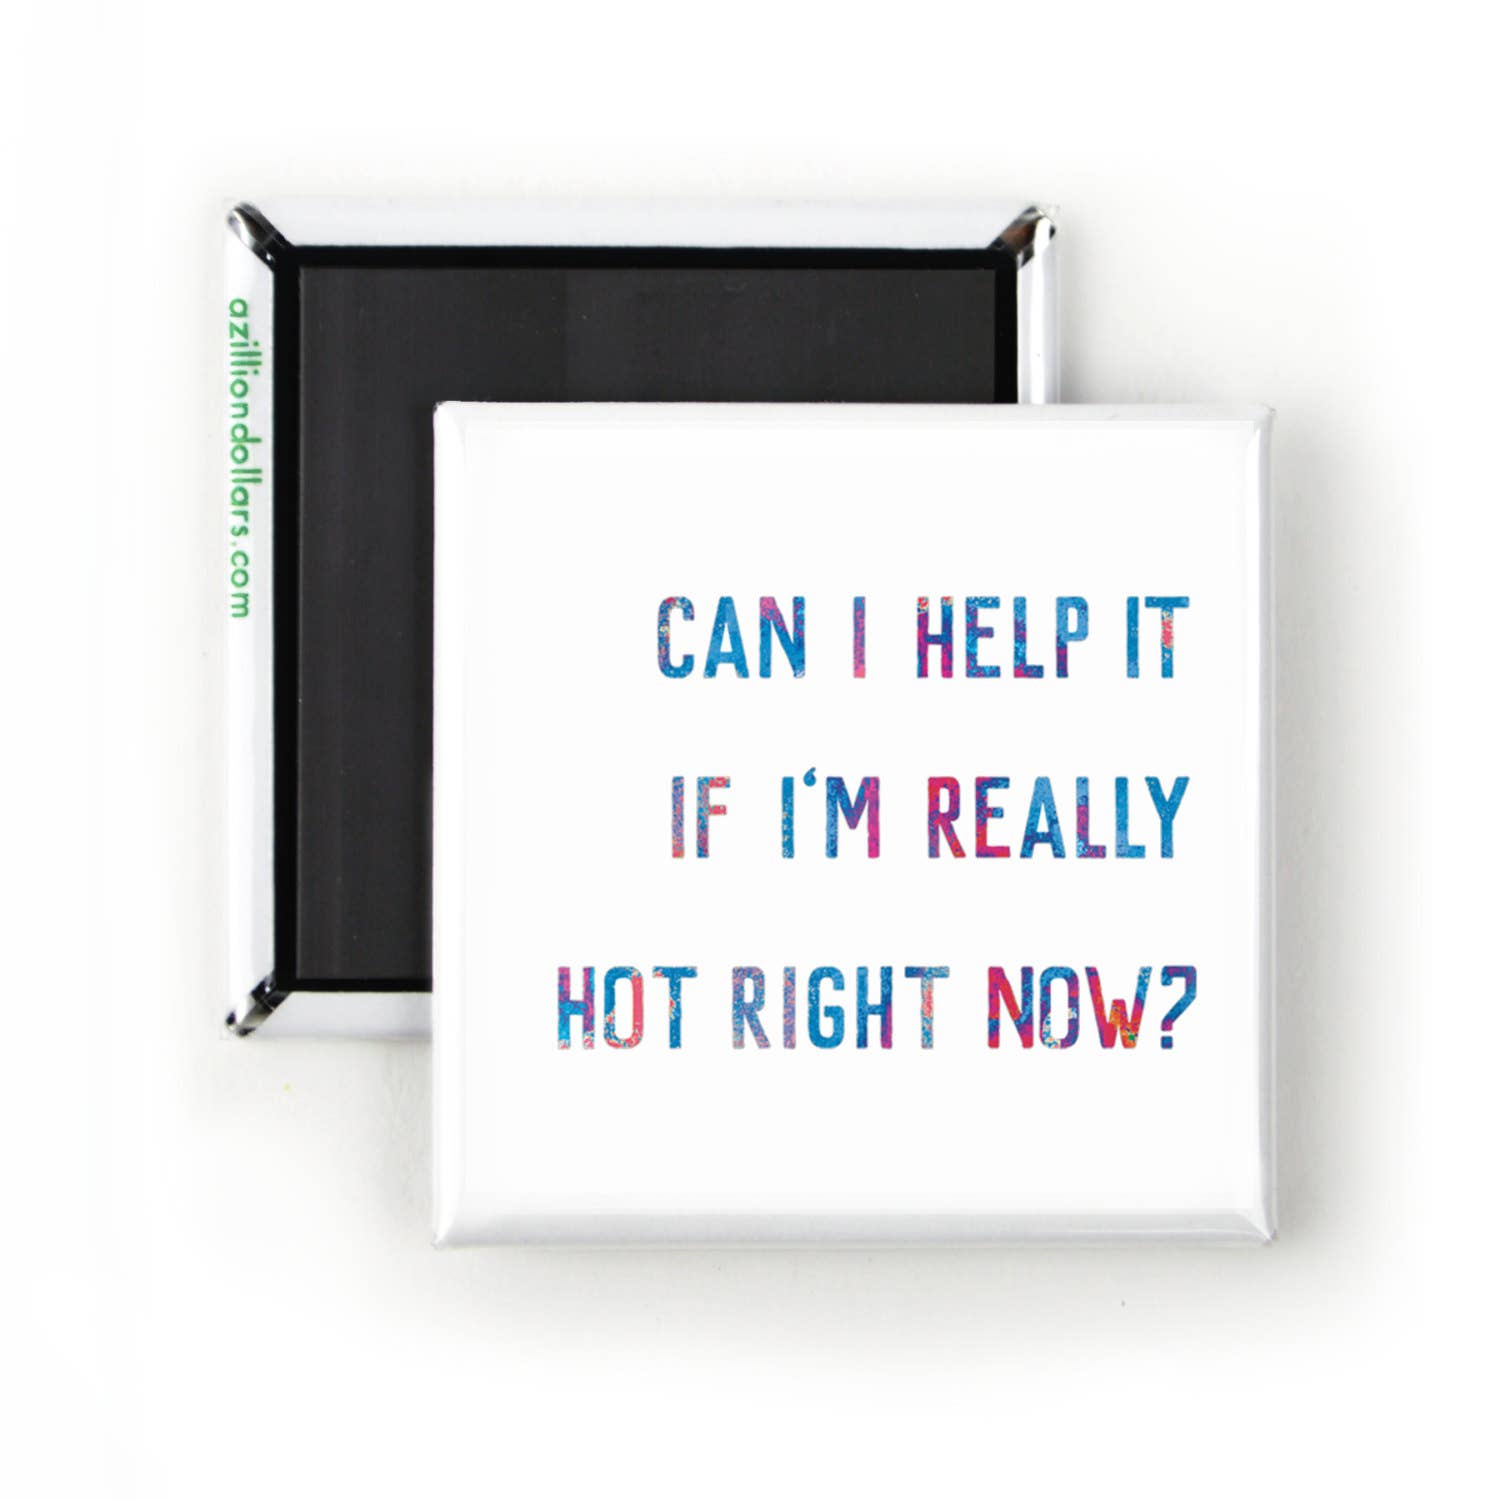 Can I Help It If I'm Really Hot Right Now Magnet | 2" x 2" Square Mini Size